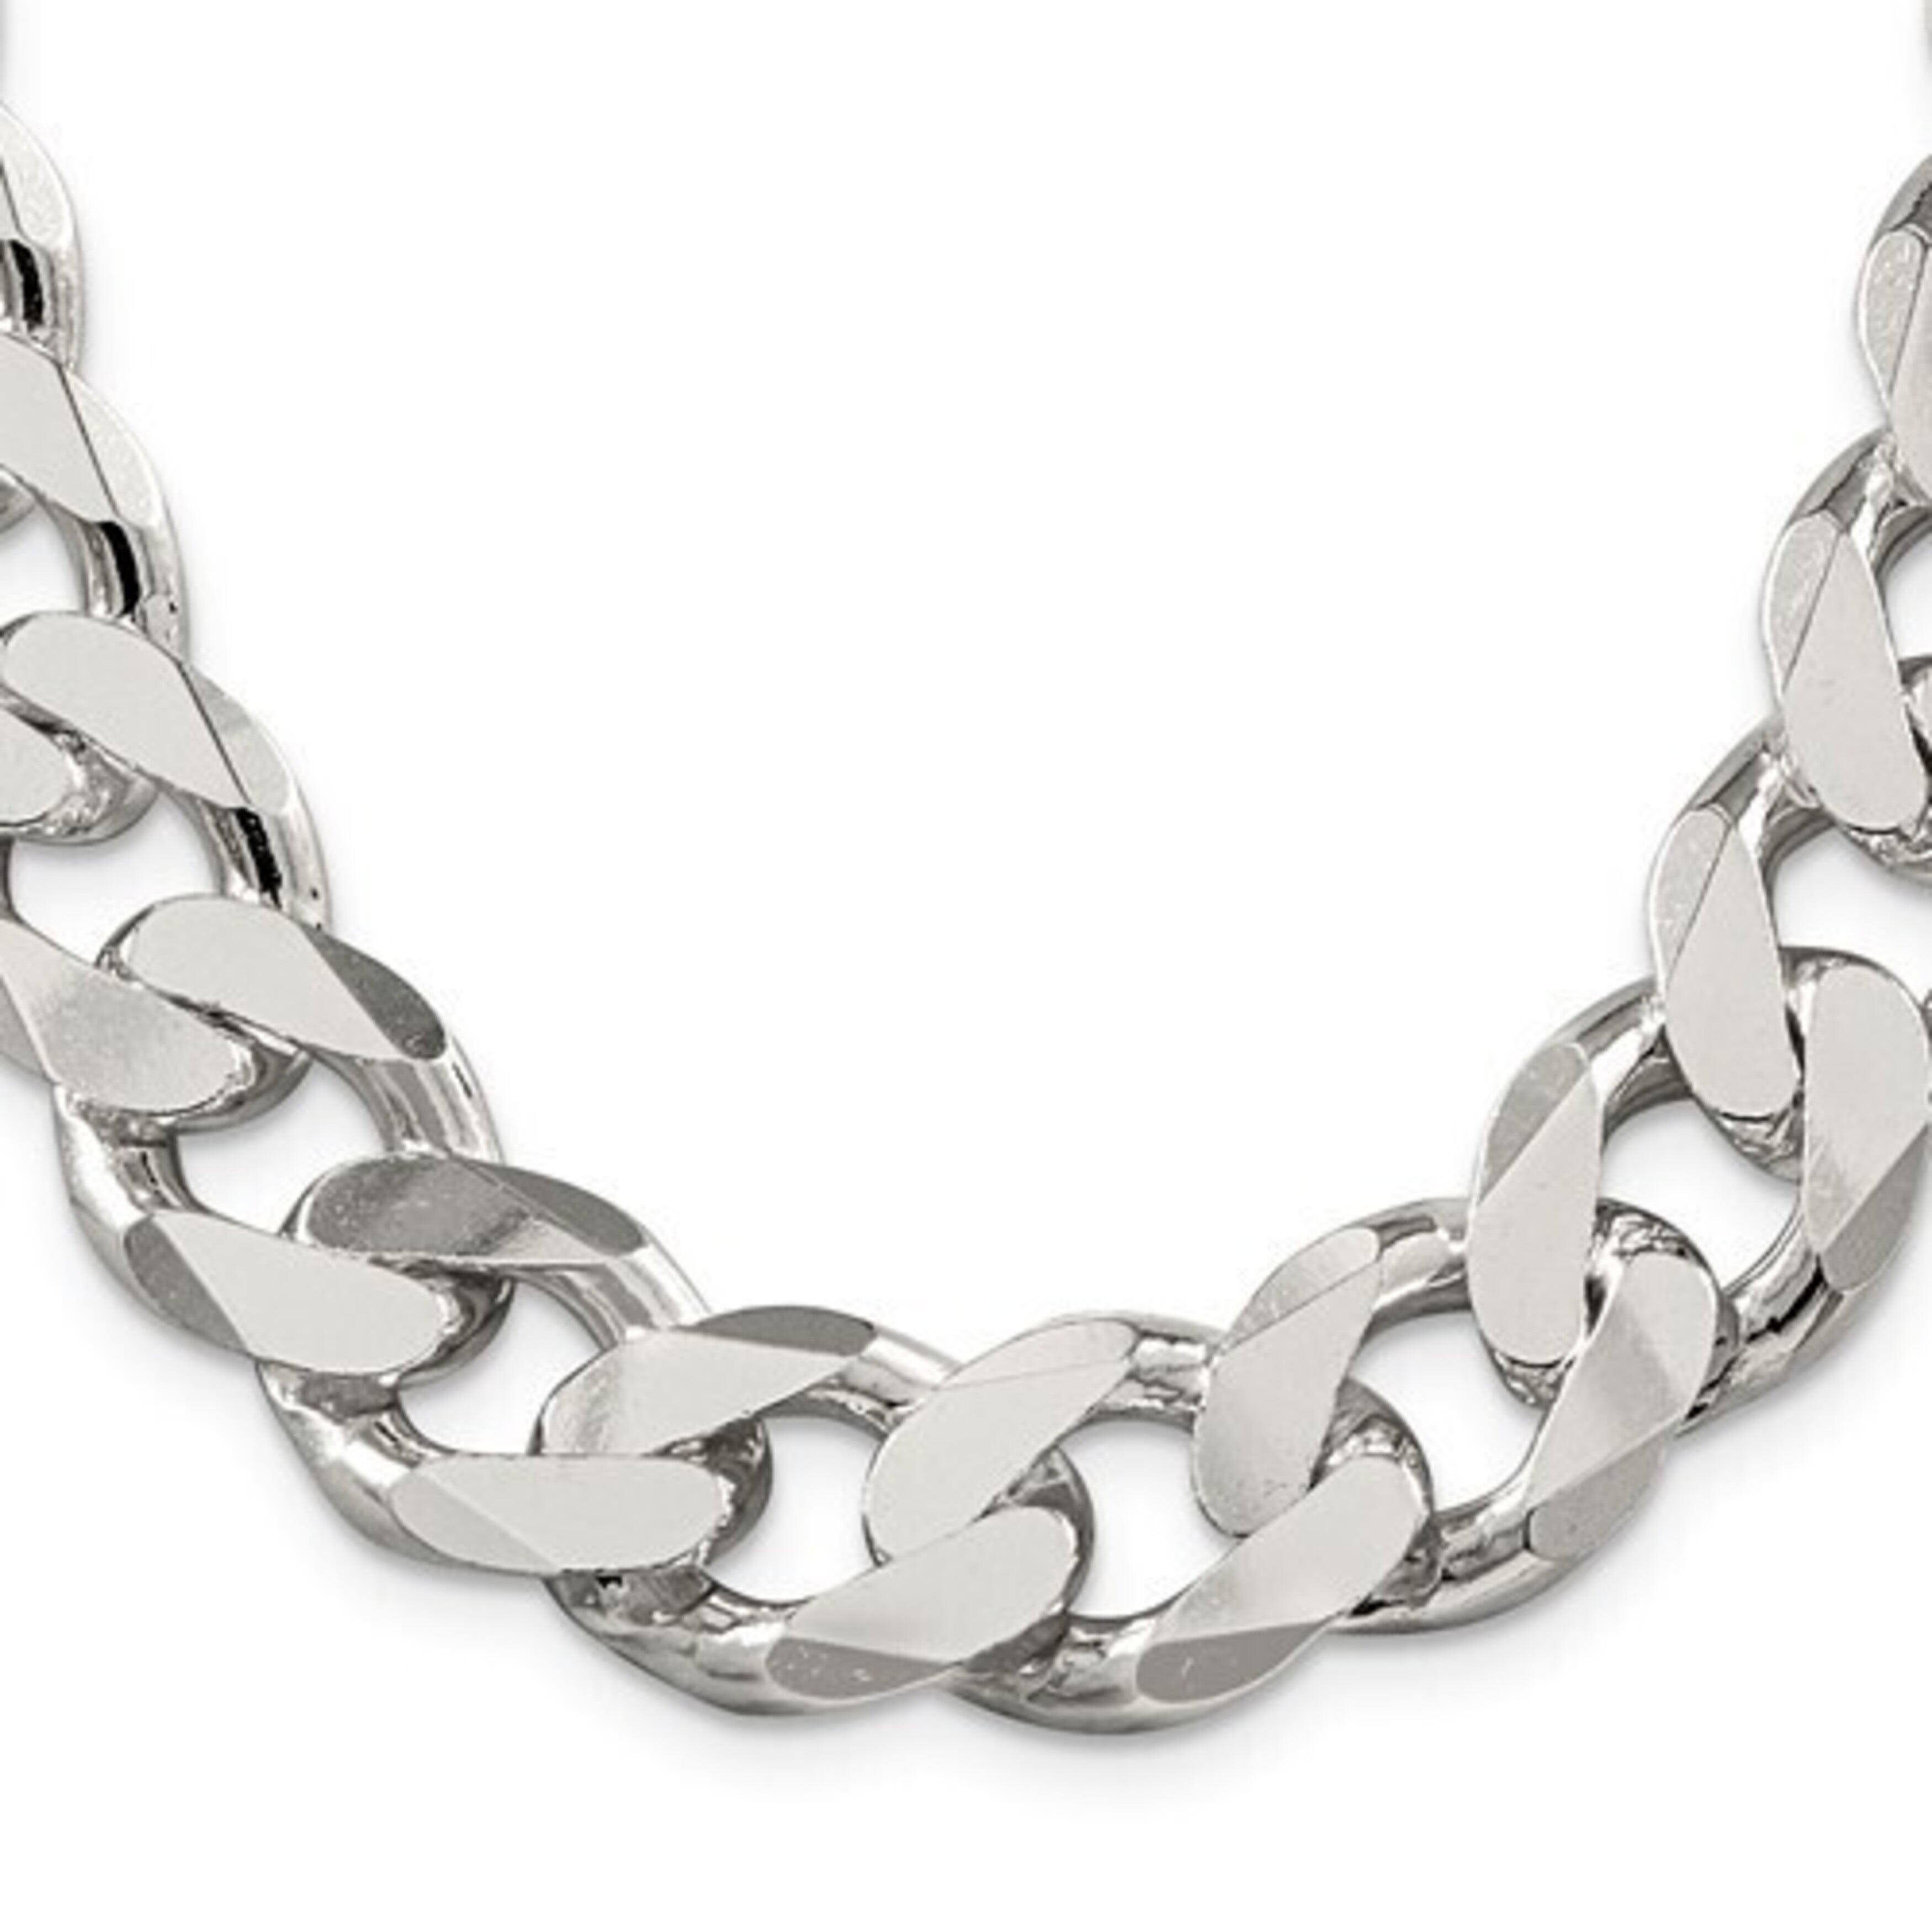 Sterling silver chain extra thick box 24 inches - Dimple's Imports